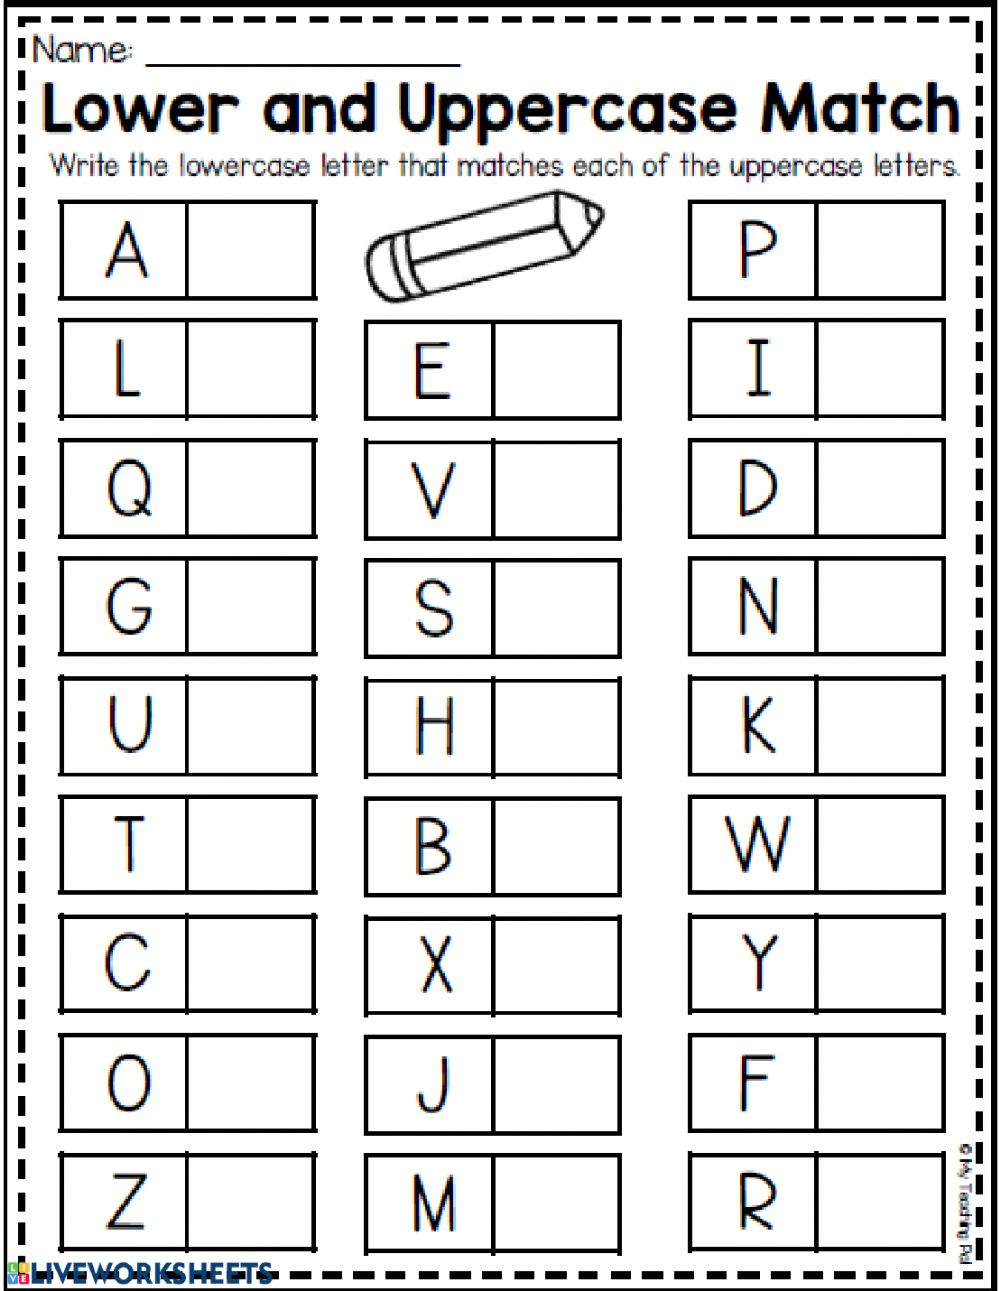 printable-letter-matching-game-printable-word-searches